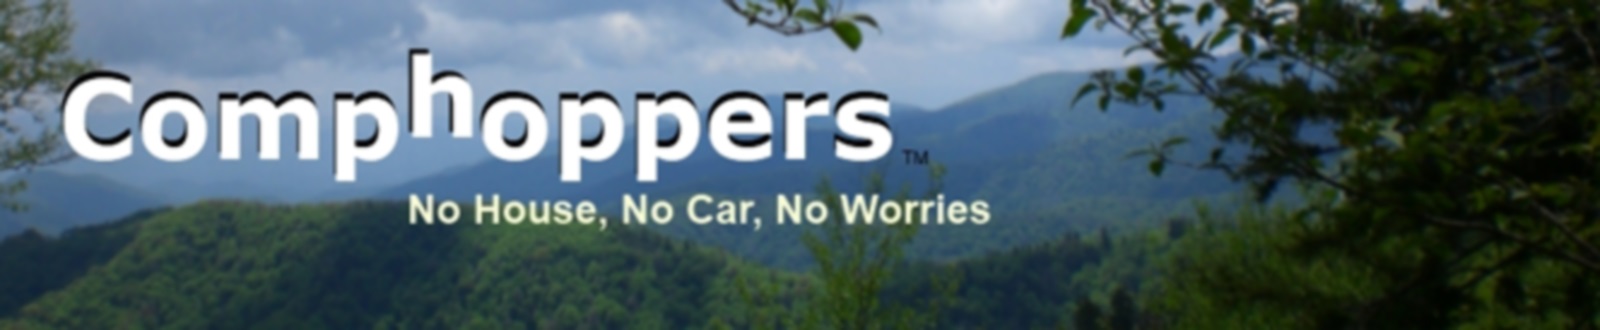 Comphoppers Travel Services